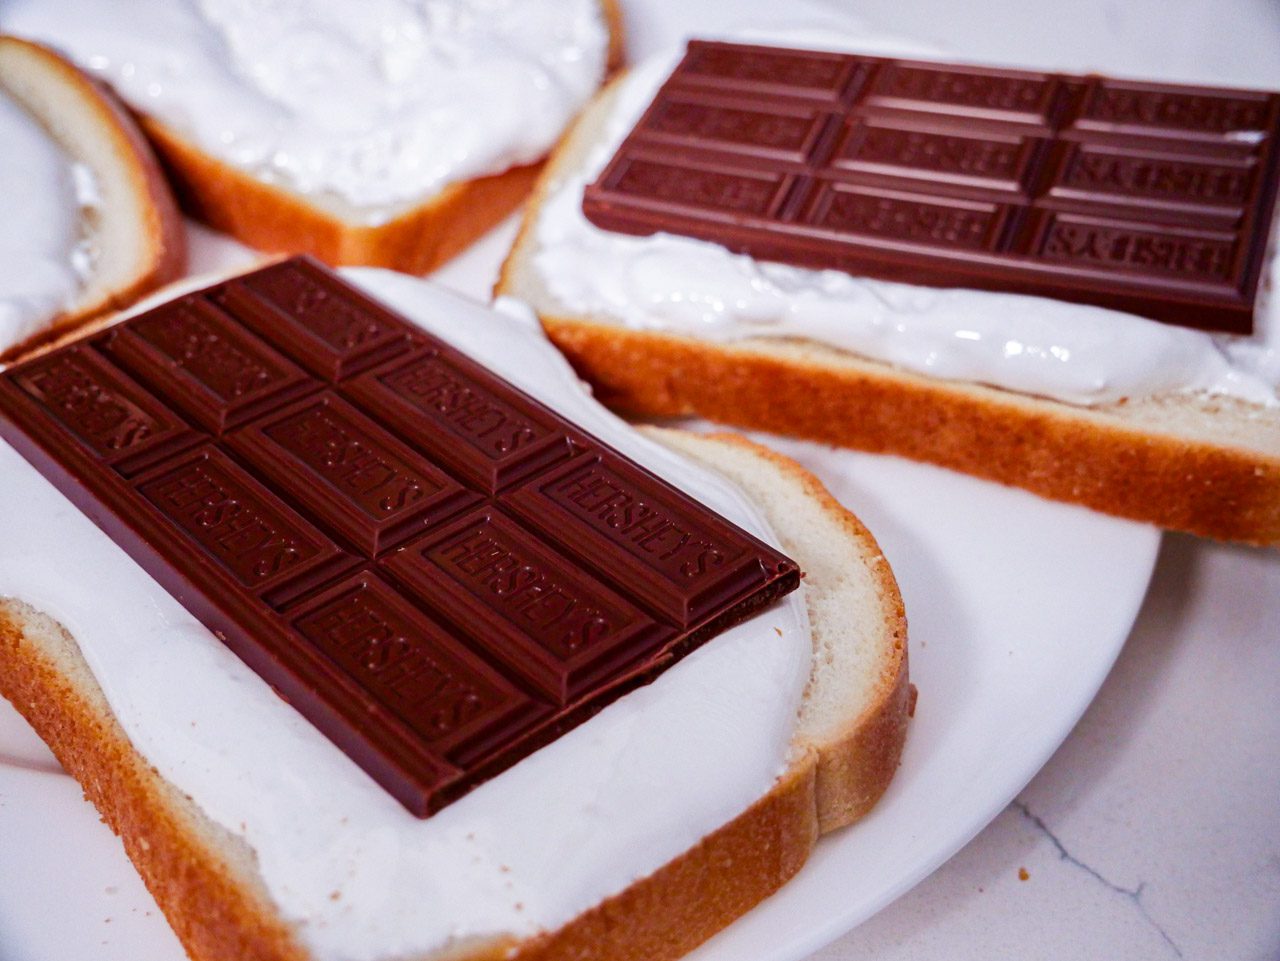 Hersheys chocolates on fluff spread on bread atop a white plate